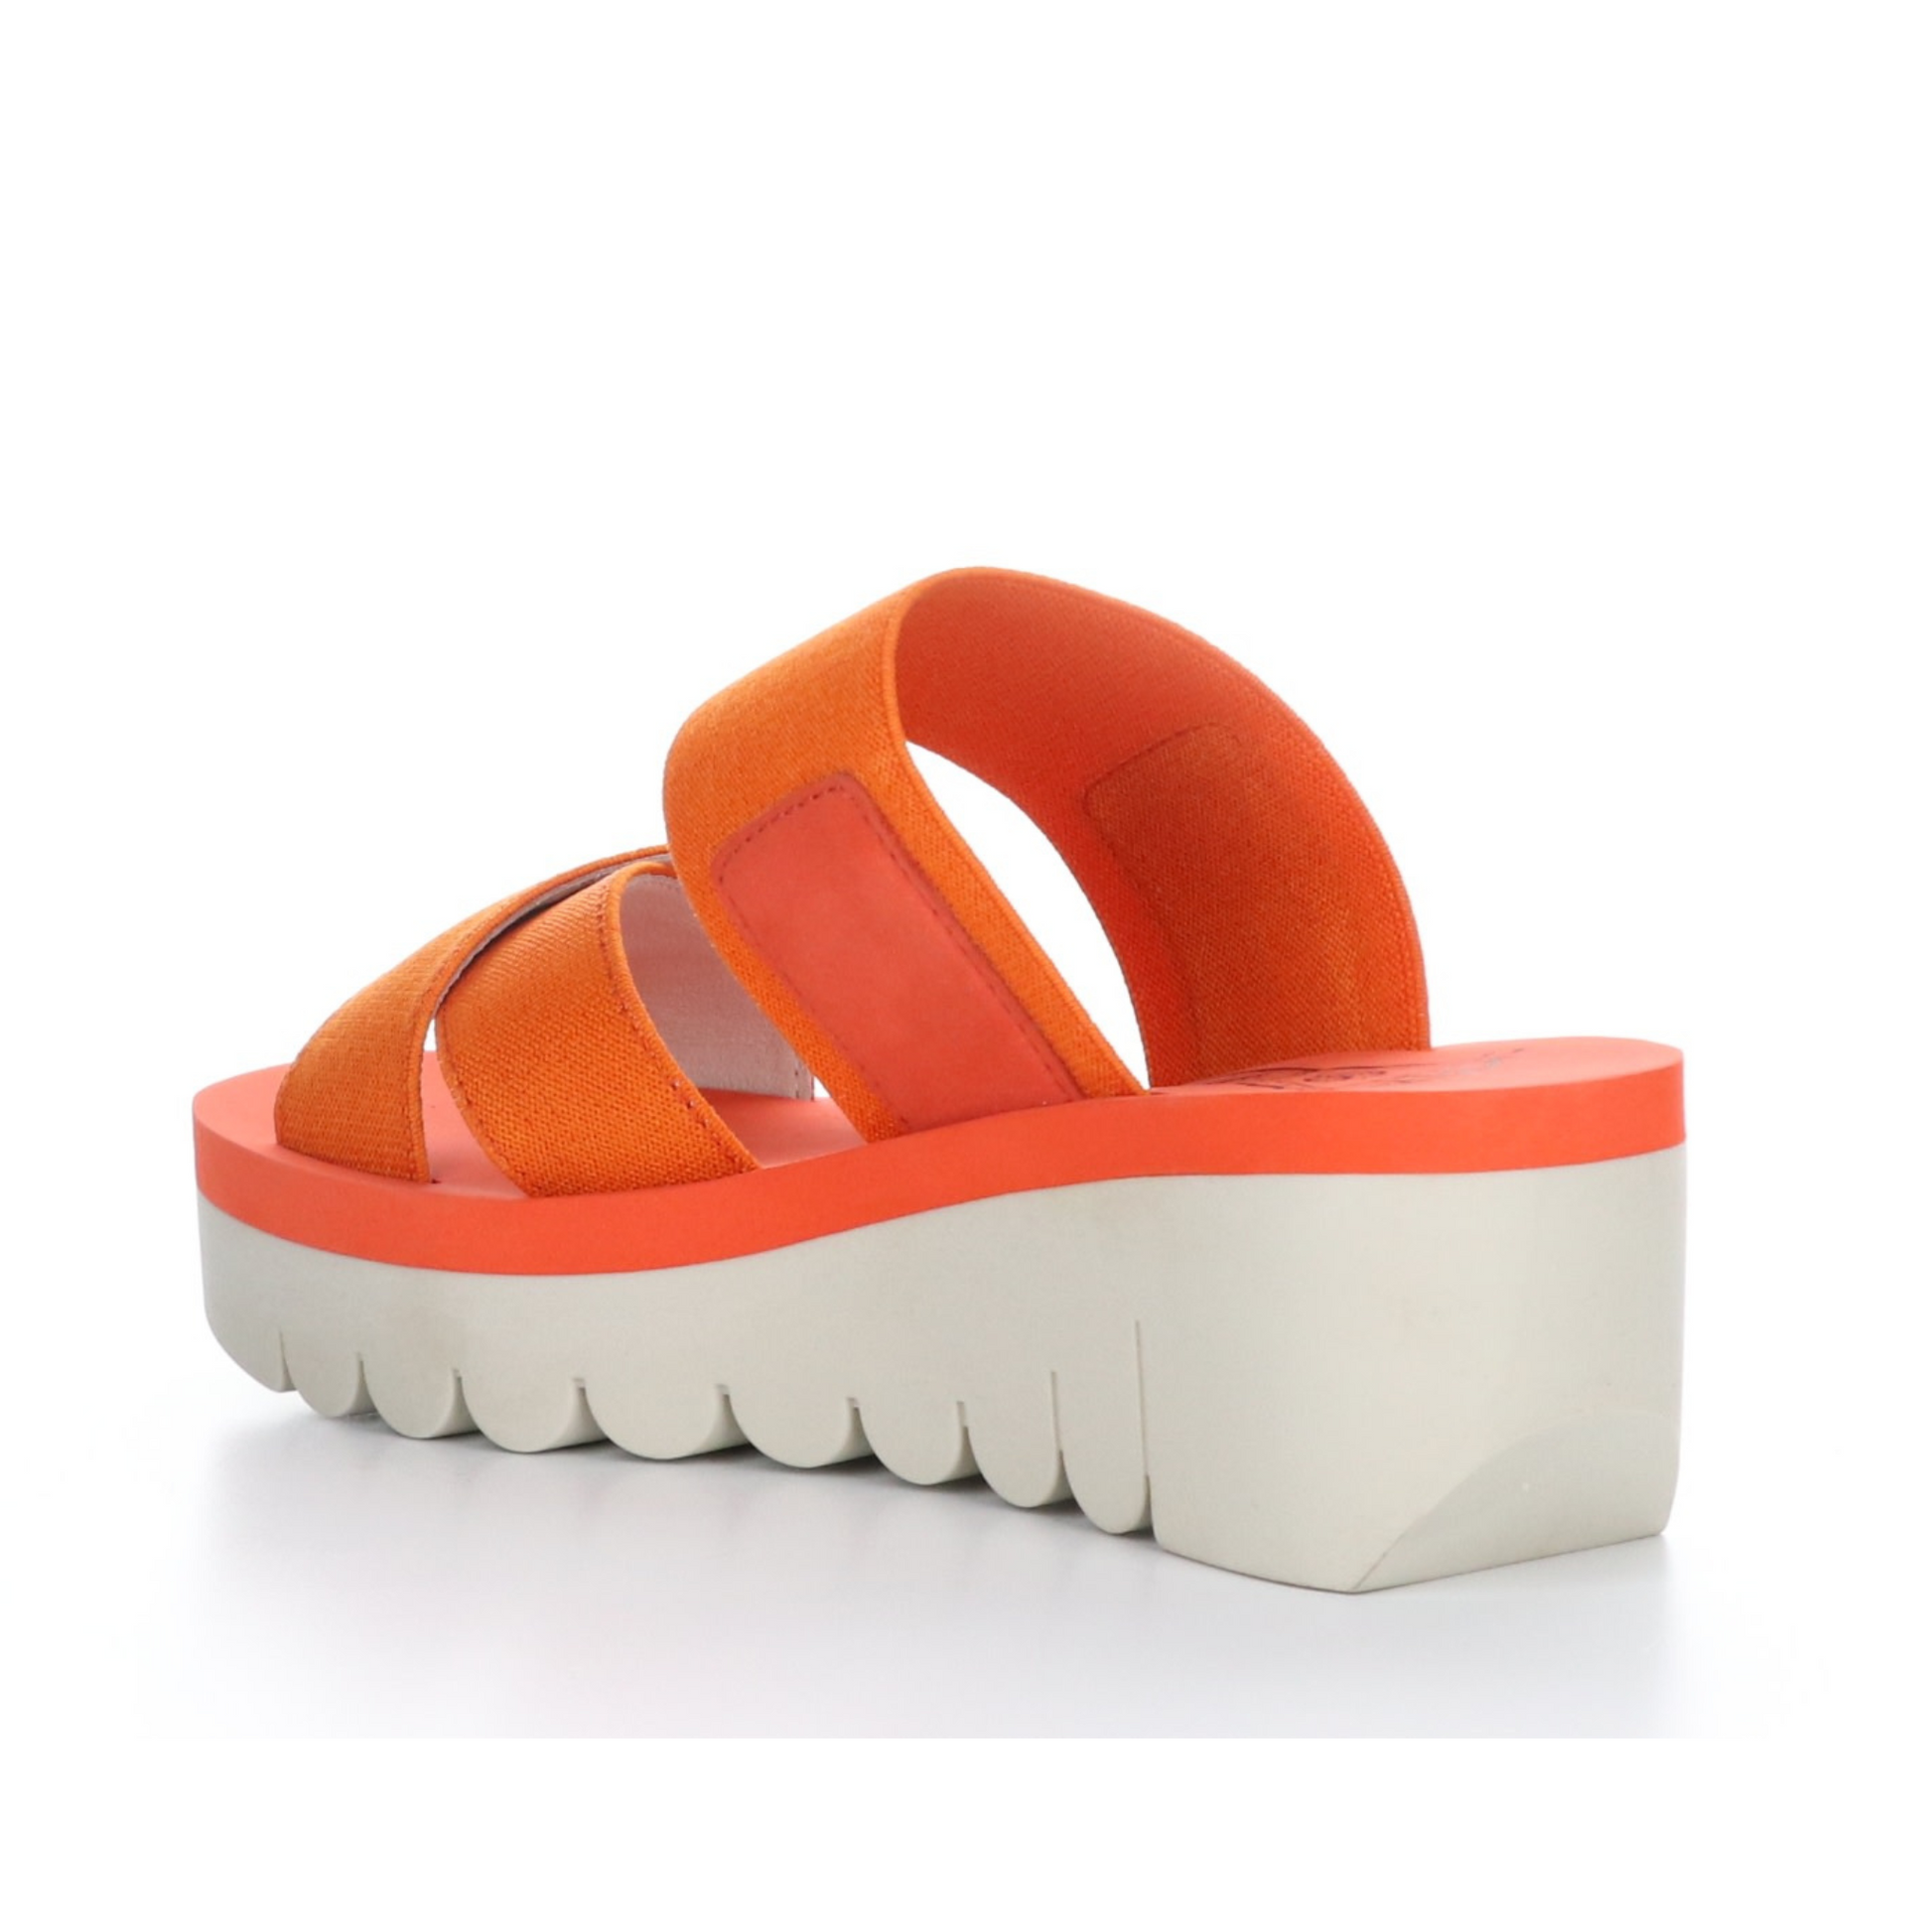 A left angle view of a red-orange platform wedged sandal with a white outsole.